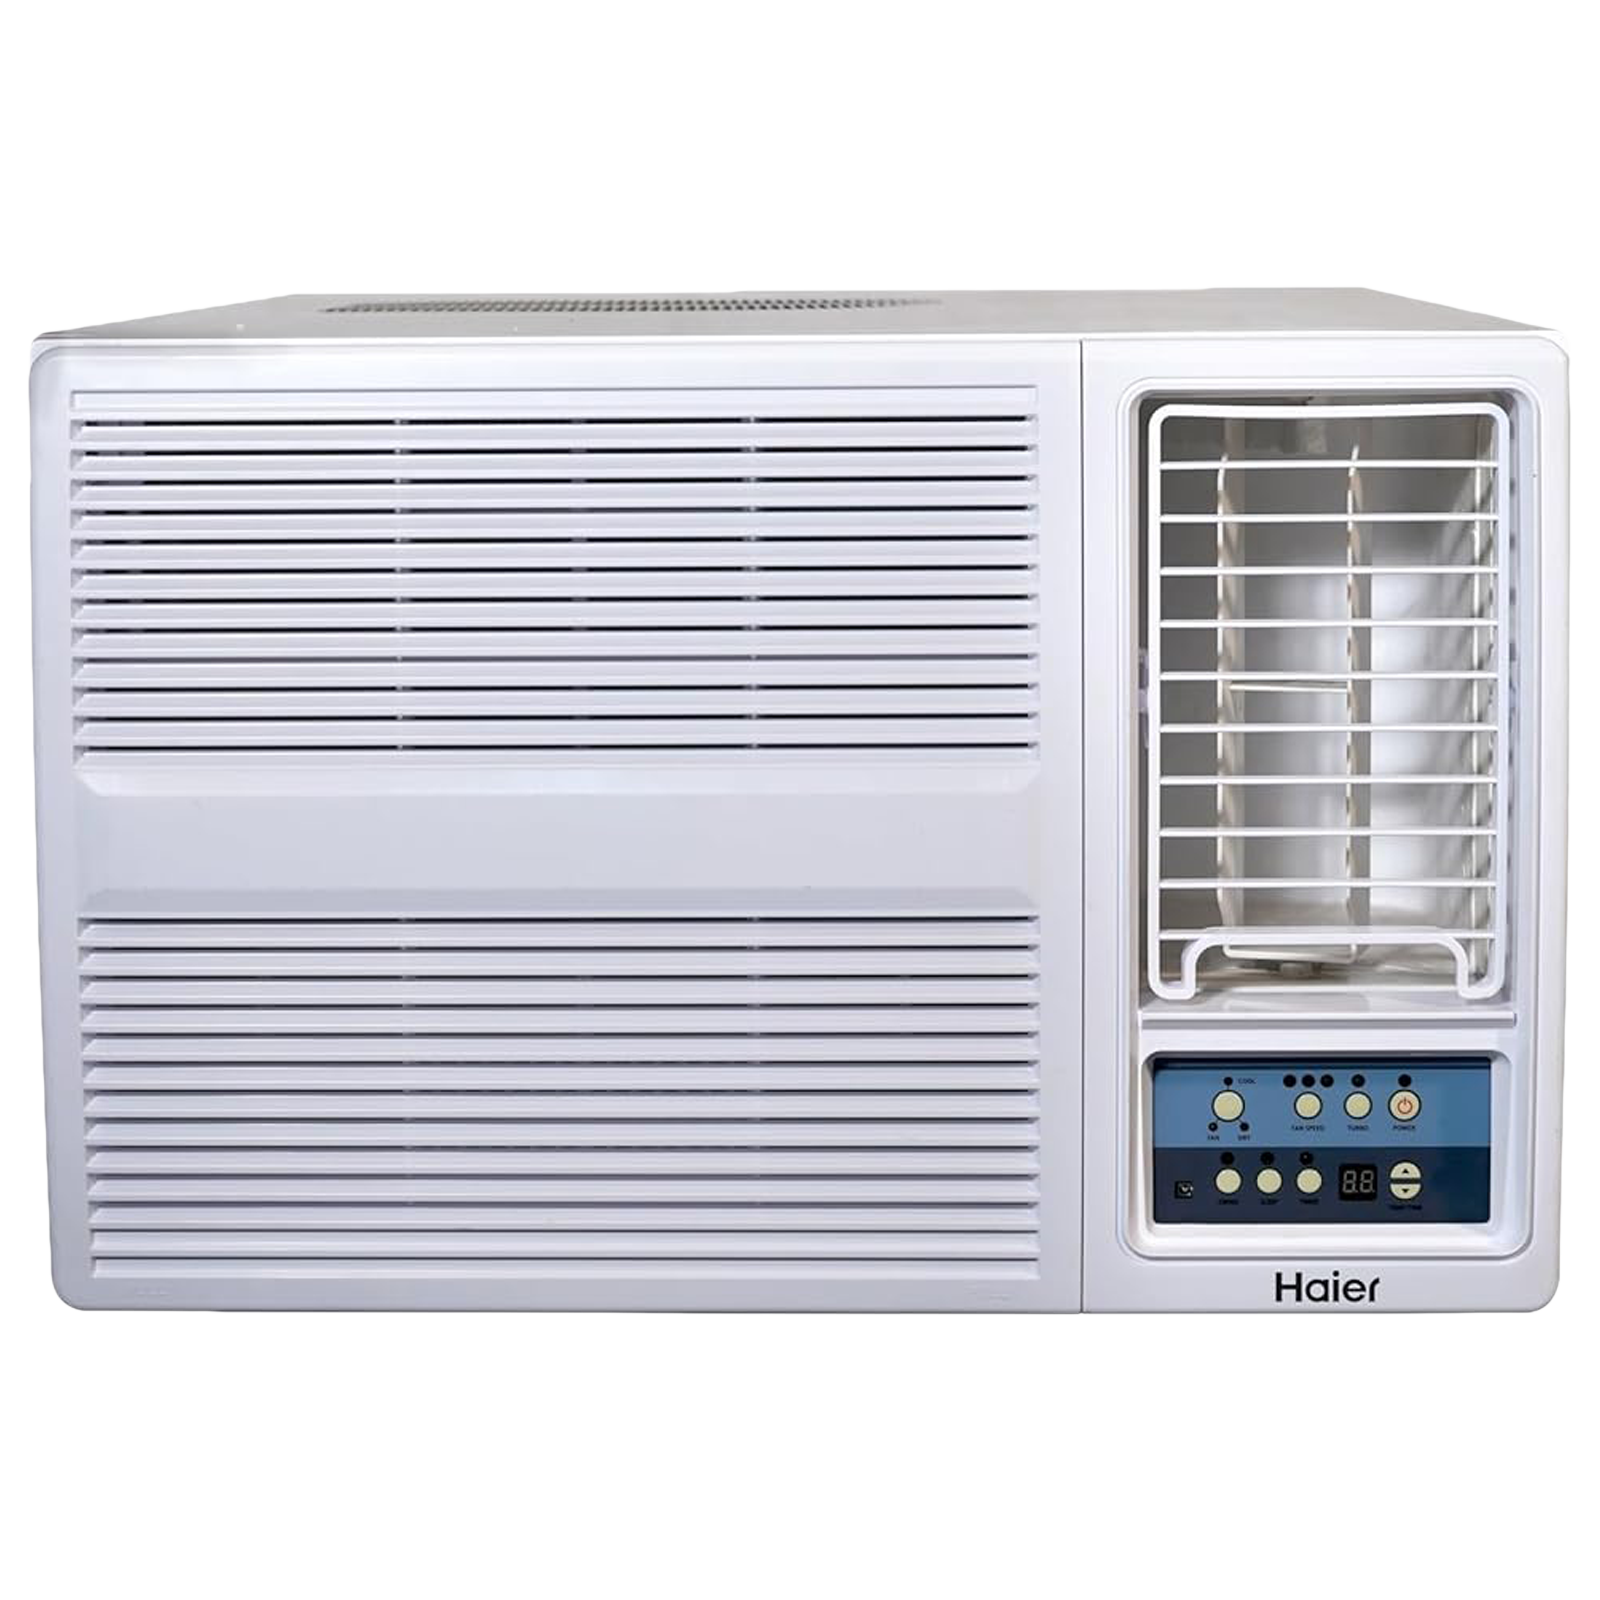 Haier 1.5 Ton 3 Star Fixed Speed Window AC (Copper Condenser, Anti Bacterial Filter, HWU18FAOW3BNFS)